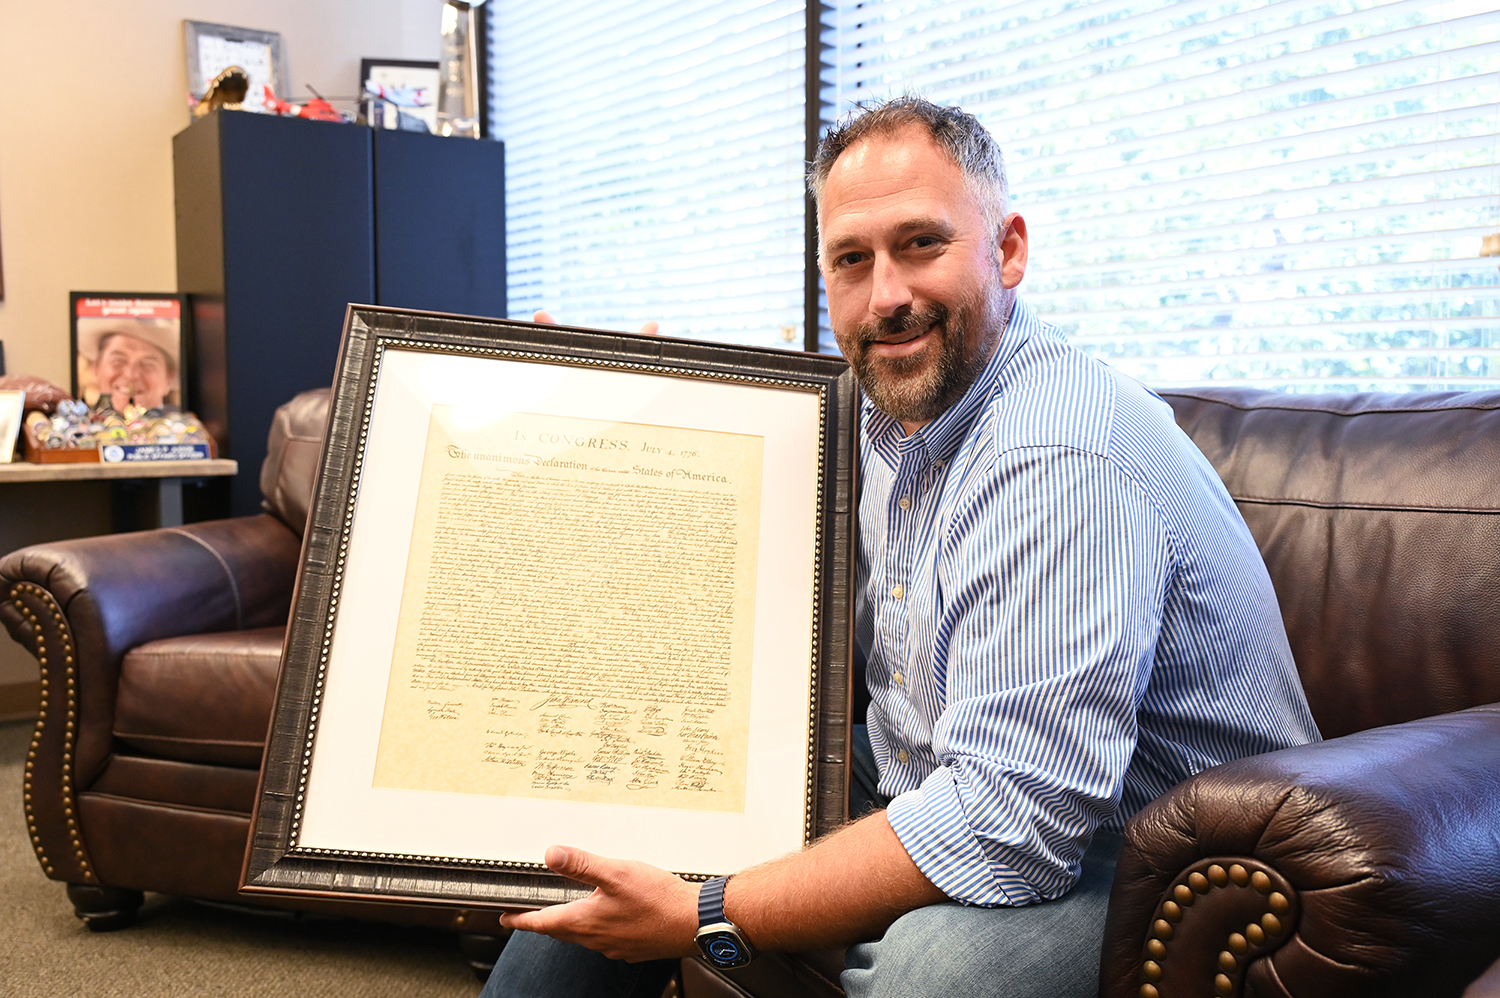 Breaking News Electorate Defending Freedom spokesman James Mediate holds a reproduction of the Declaration of Independence in his Tampa, Fla., office. RNS photograph by Jack Jenkins.